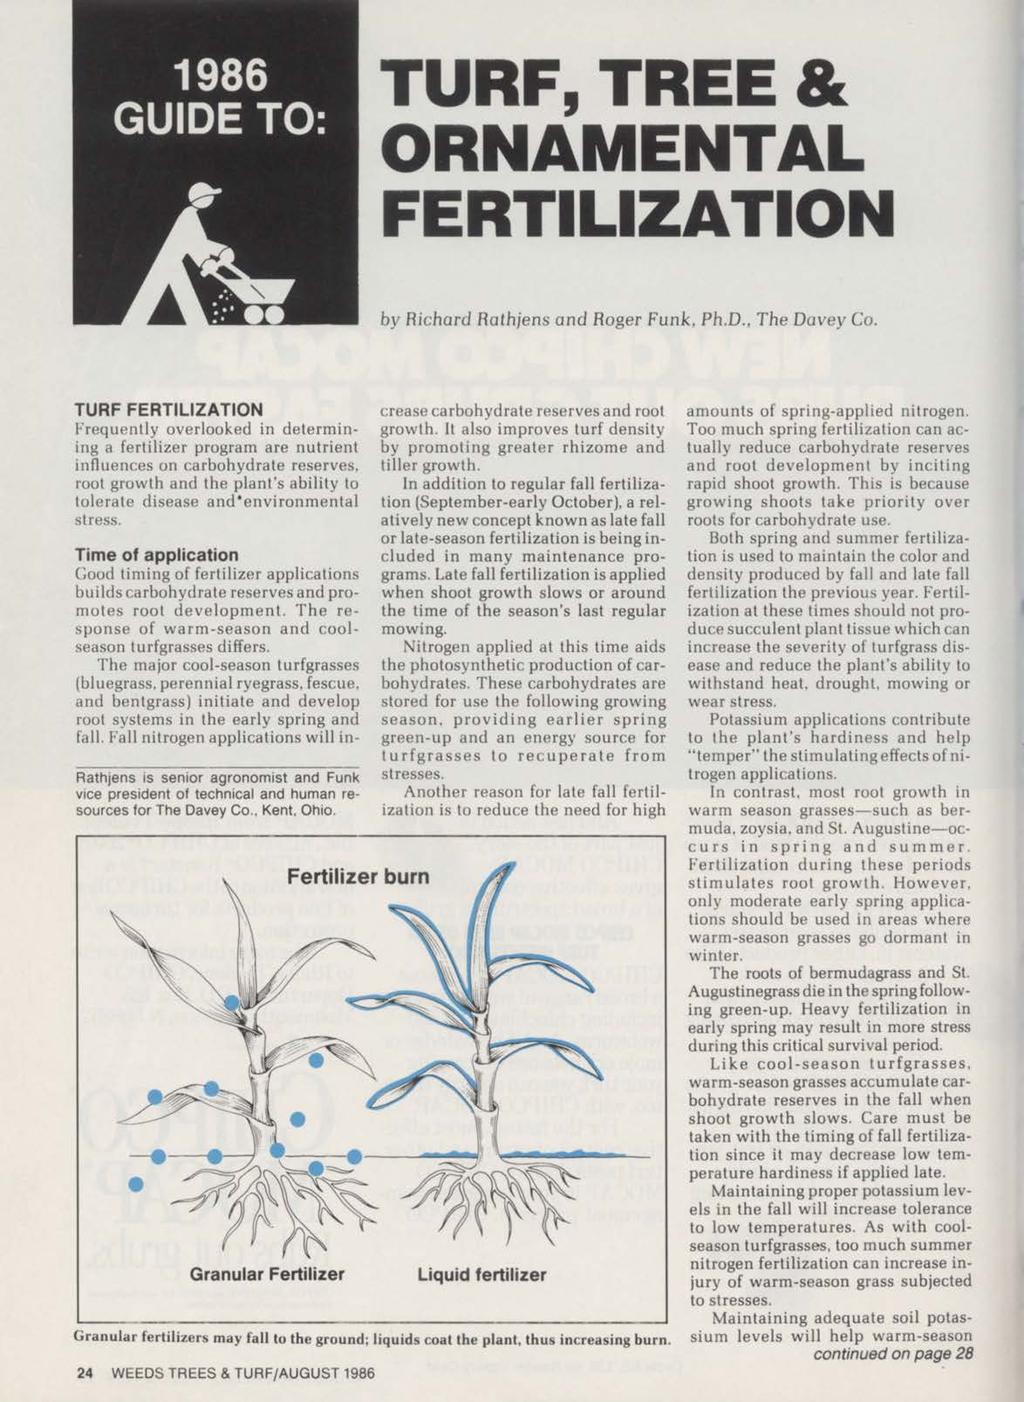 1986 GUIDE TO: TURF, TREE & ORNAMENTAL FERTILIZATION by Richard Rathjens and Roger Funk, Ph.D., The Davey Co.